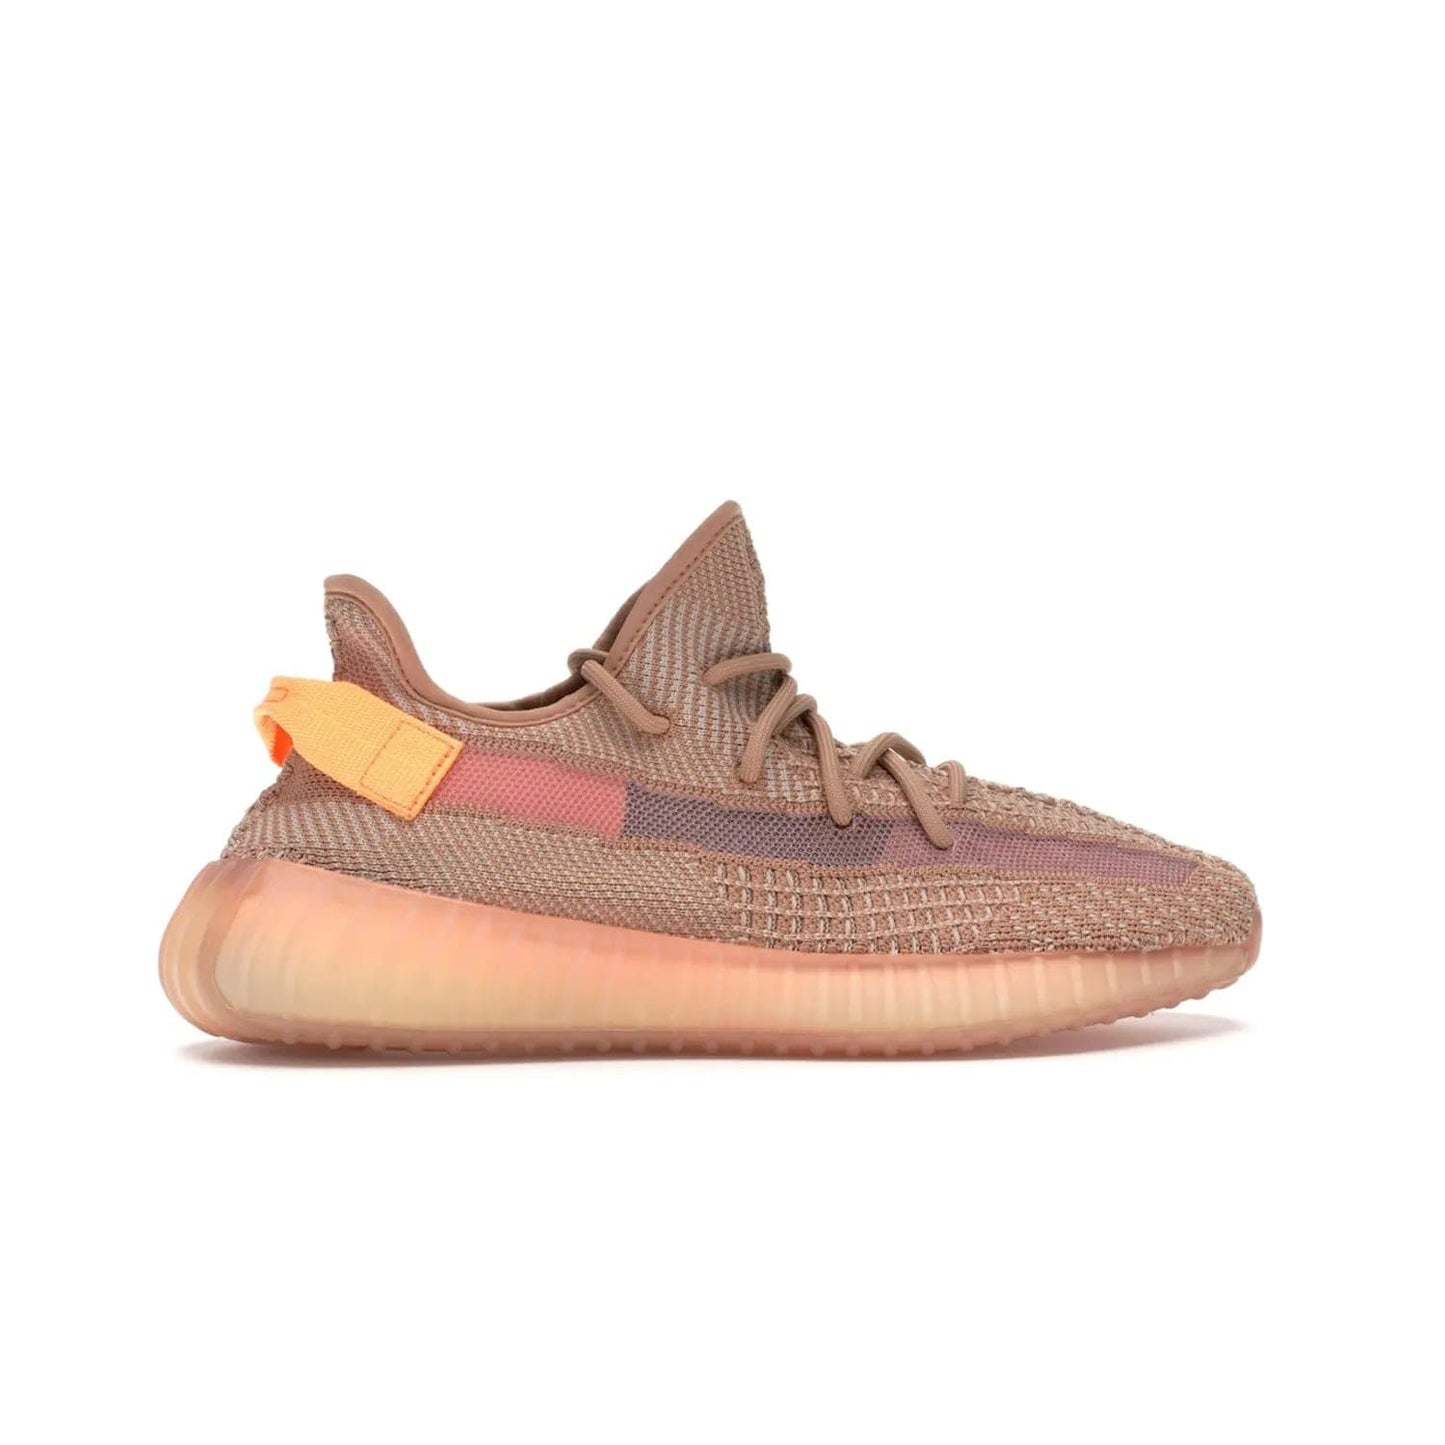 adidas Yeezy Boost 350 V2 Clay - Image 36 - Only at www.BallersClubKickz.com - The adidas Yeezy Boost 350 V2 Clay - style and swag in one shoe. Orange accents, clay midsole and sole. Get yours today!